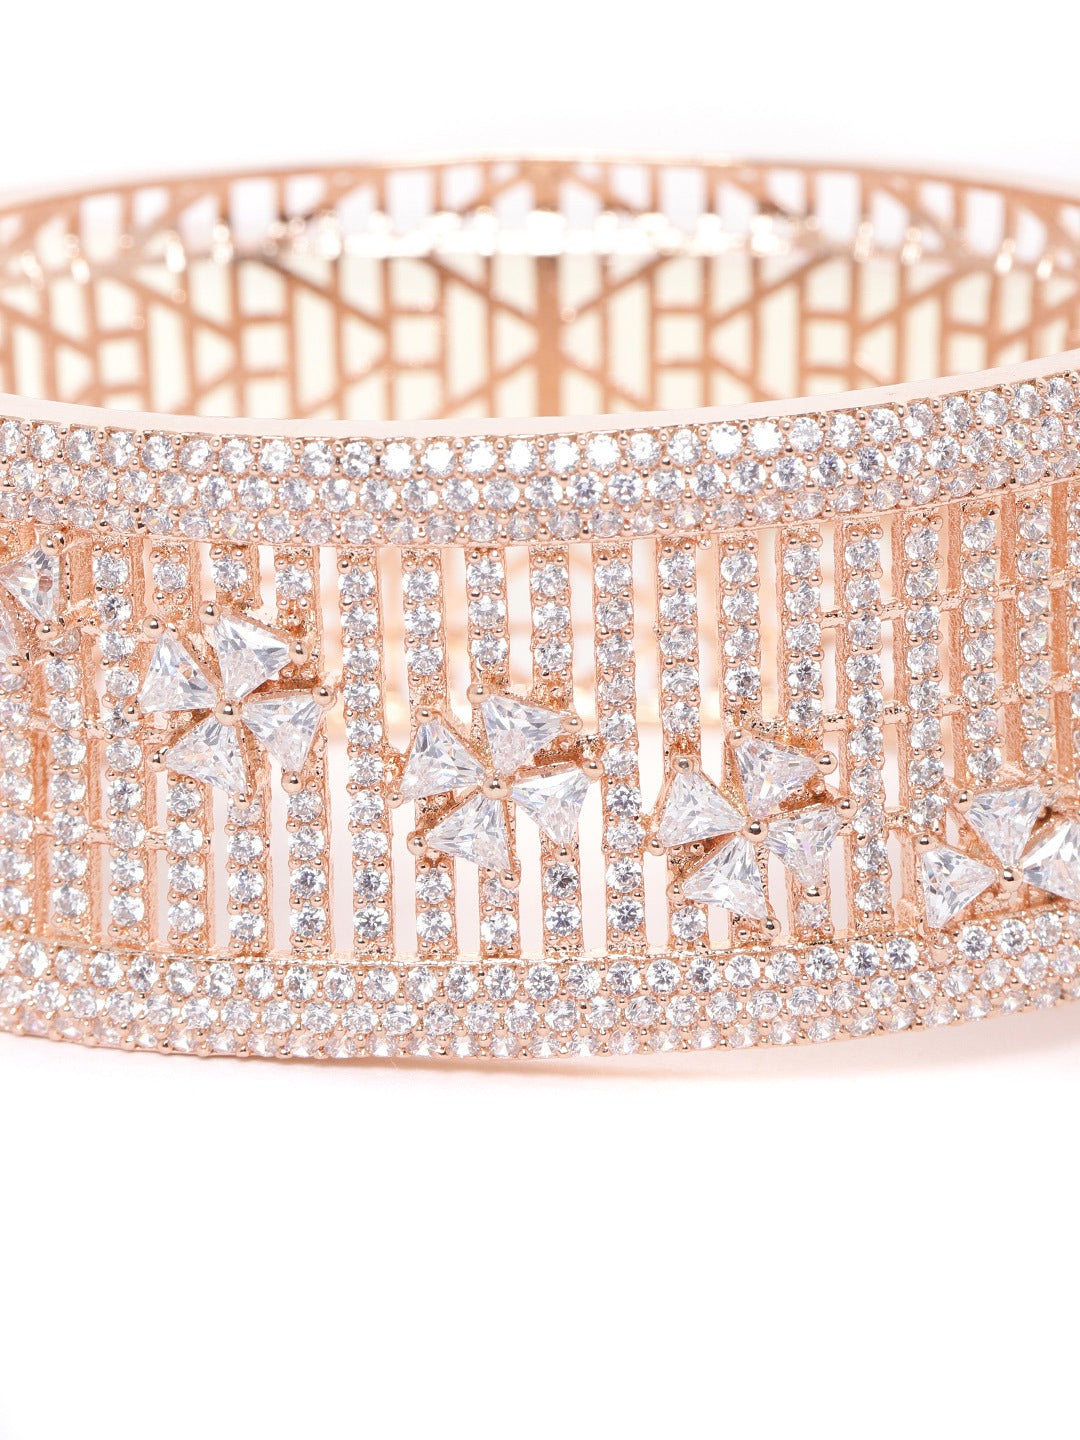 Women Rose Gold Plated AD Stone Studded Handcrafted Bangle Style Bracelet